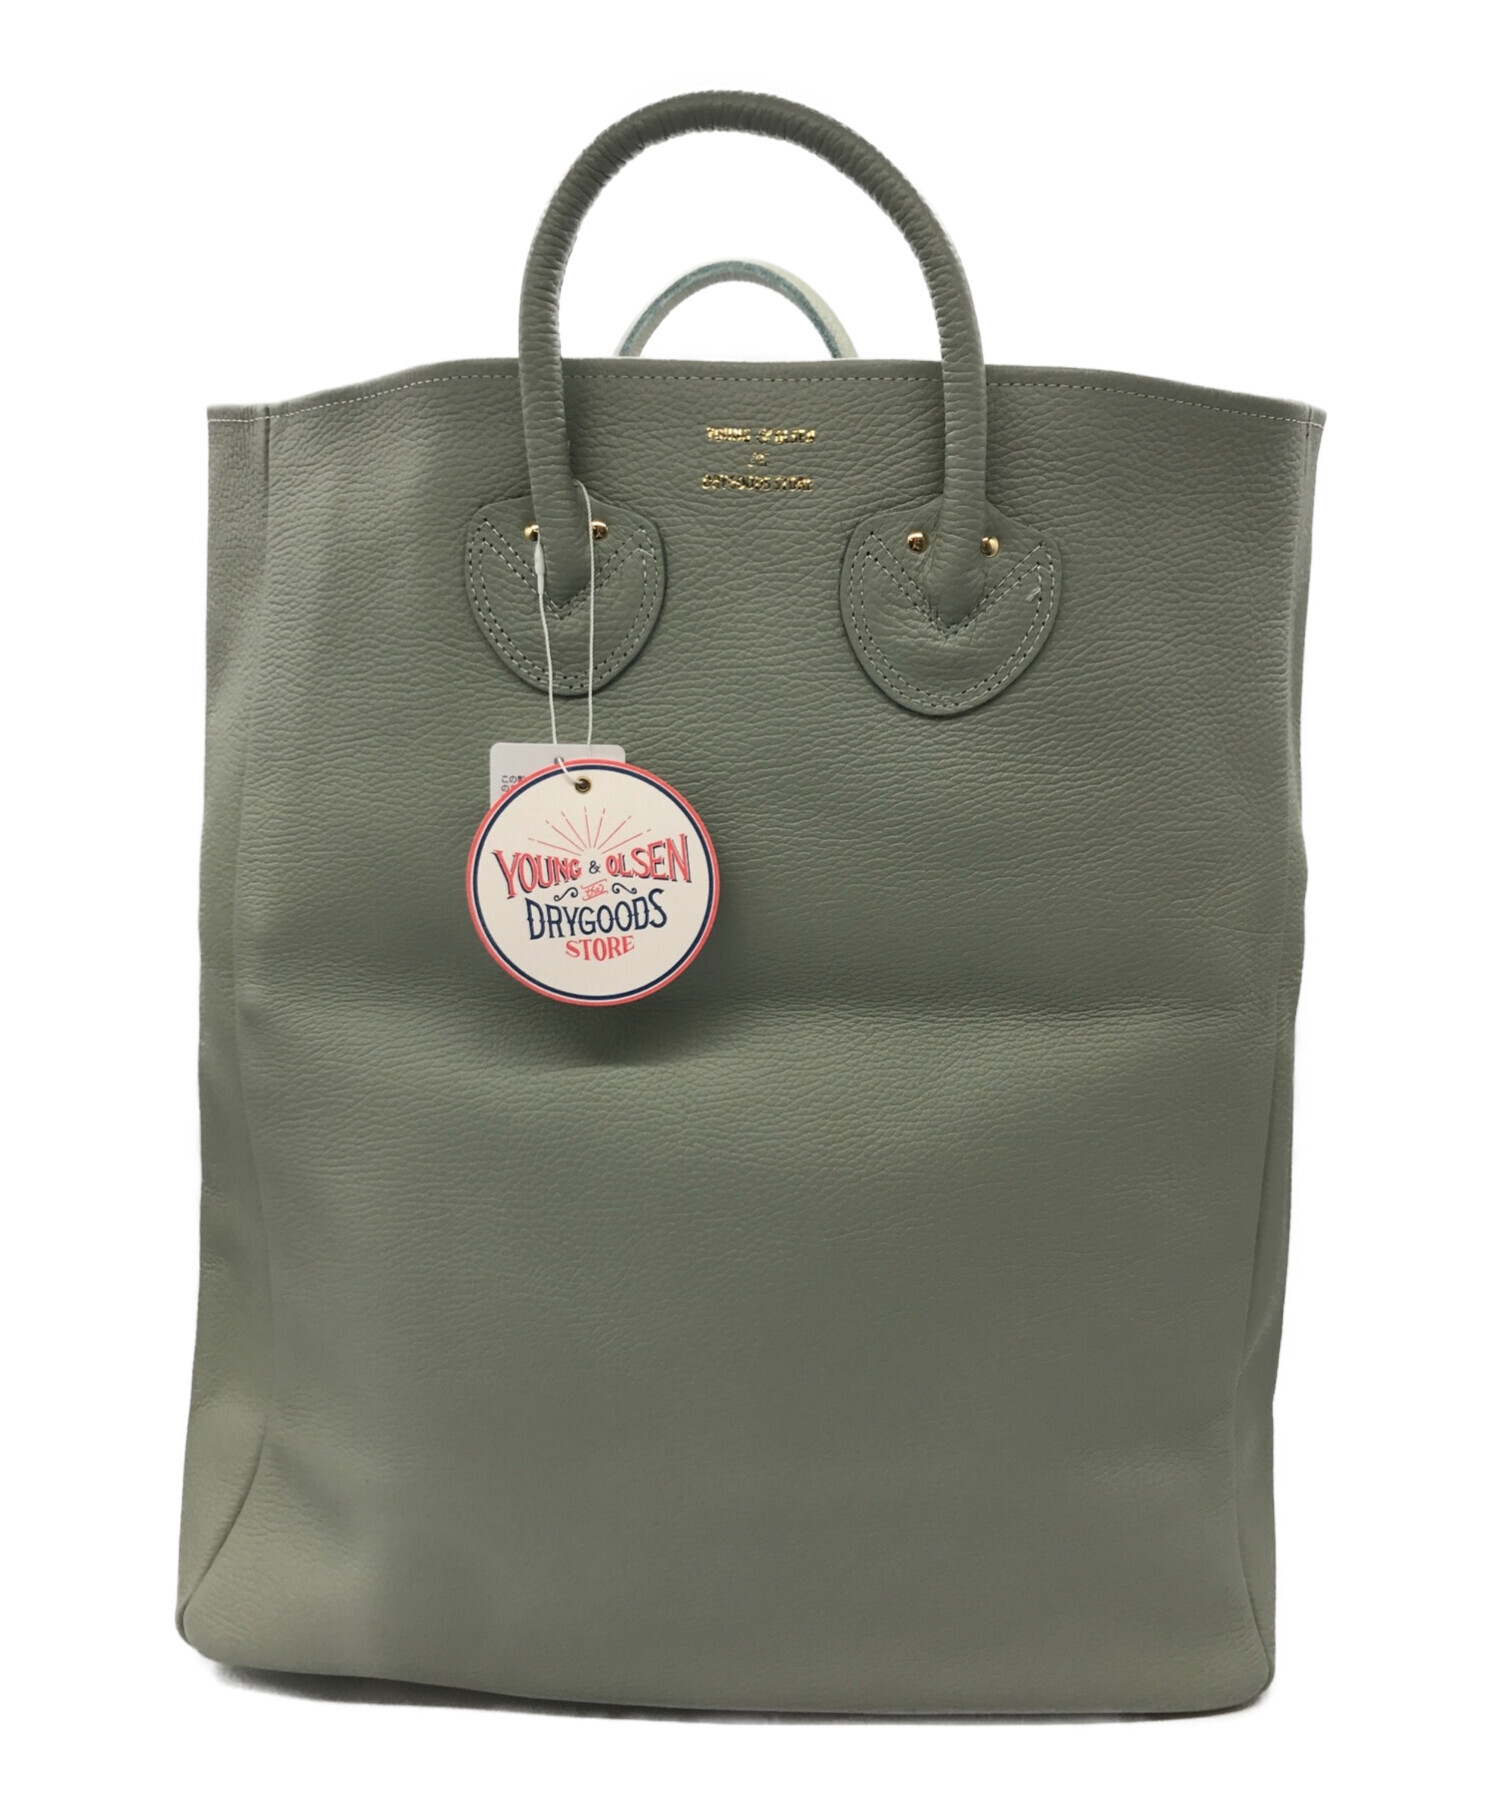 YOUNG & OLSEN The DRYGOODS STORE (ヤングアンドオルセン ザ ドライグッズストア) EMBOSSED LEATHER  TOTE L/エンボスレザートートL ミントグリーン 未使用品